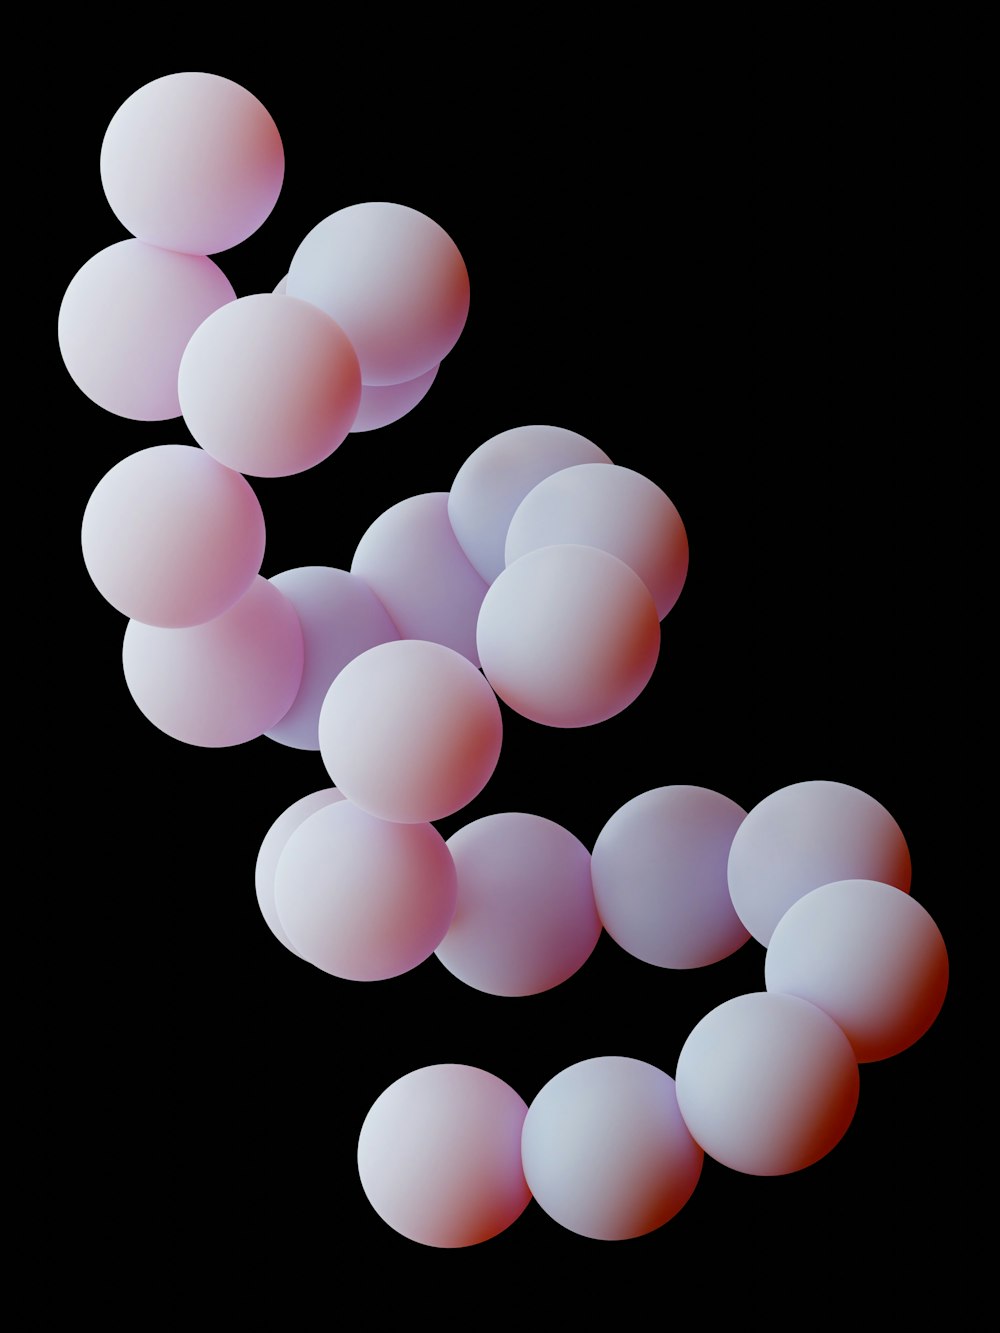 a group of pink balls floating in the air